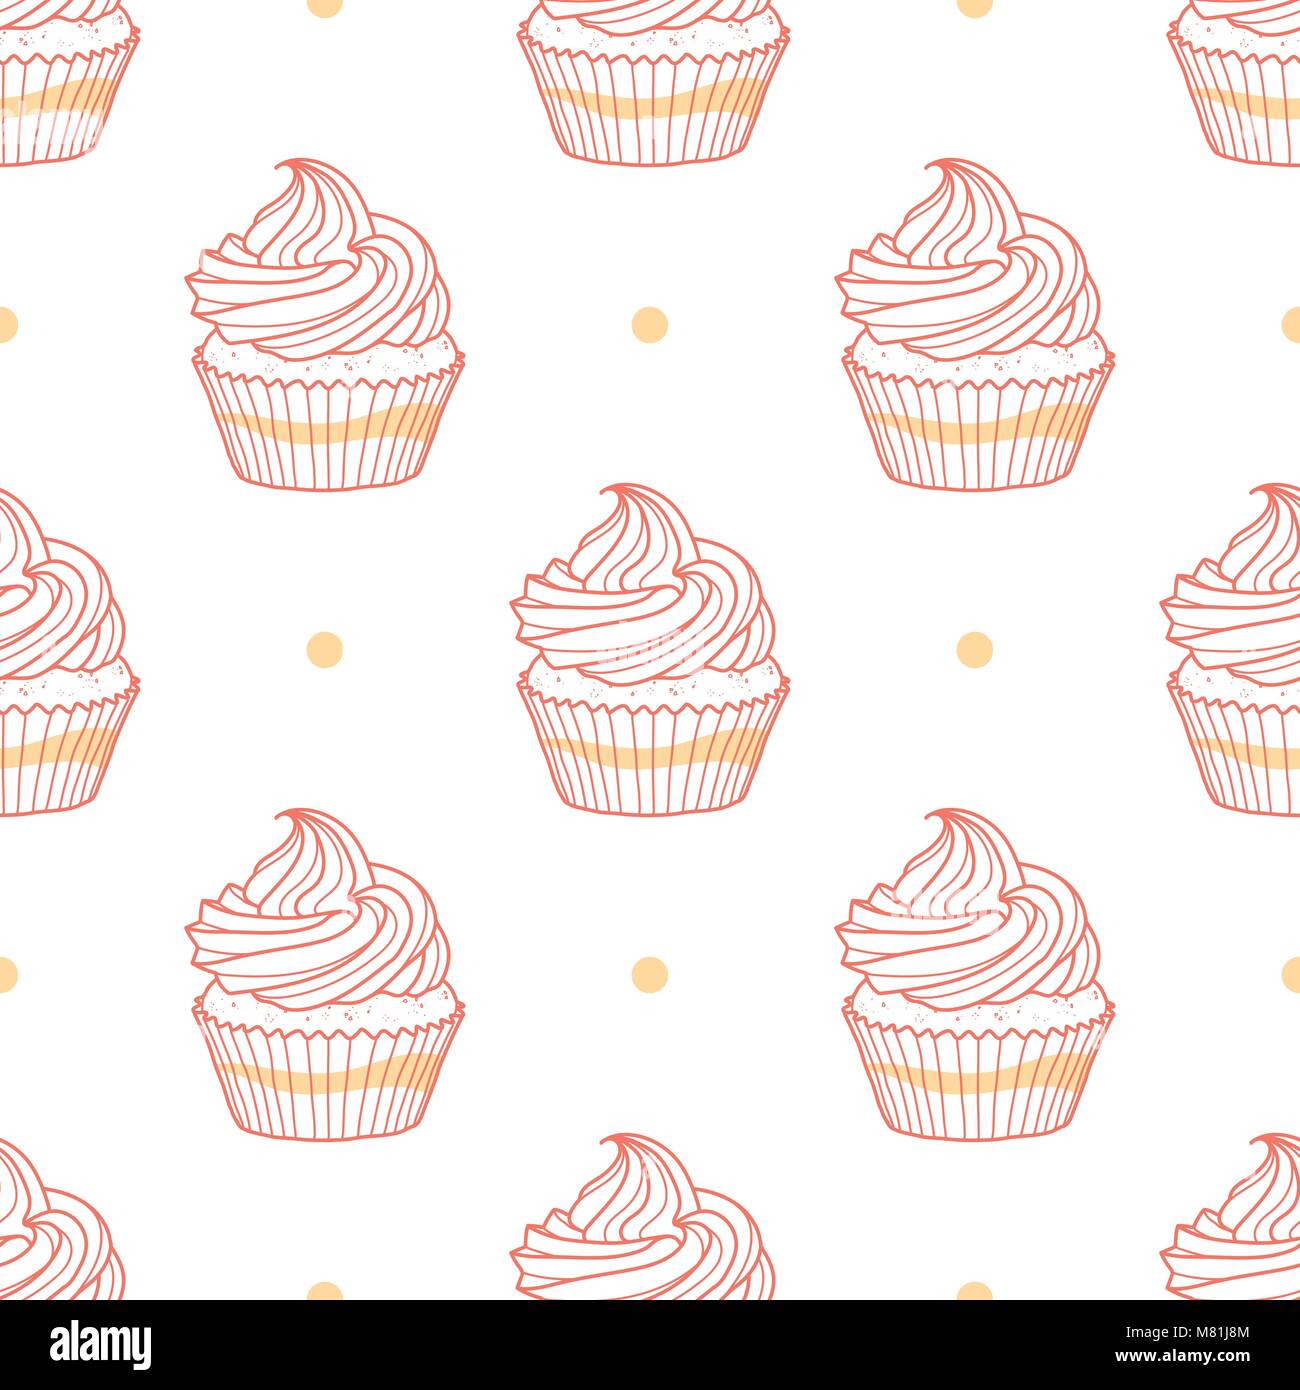 Cupcakes and dots random on white background. Cute hand drawn seamless pattern of dessert in red and pink outline style. Stock Vector